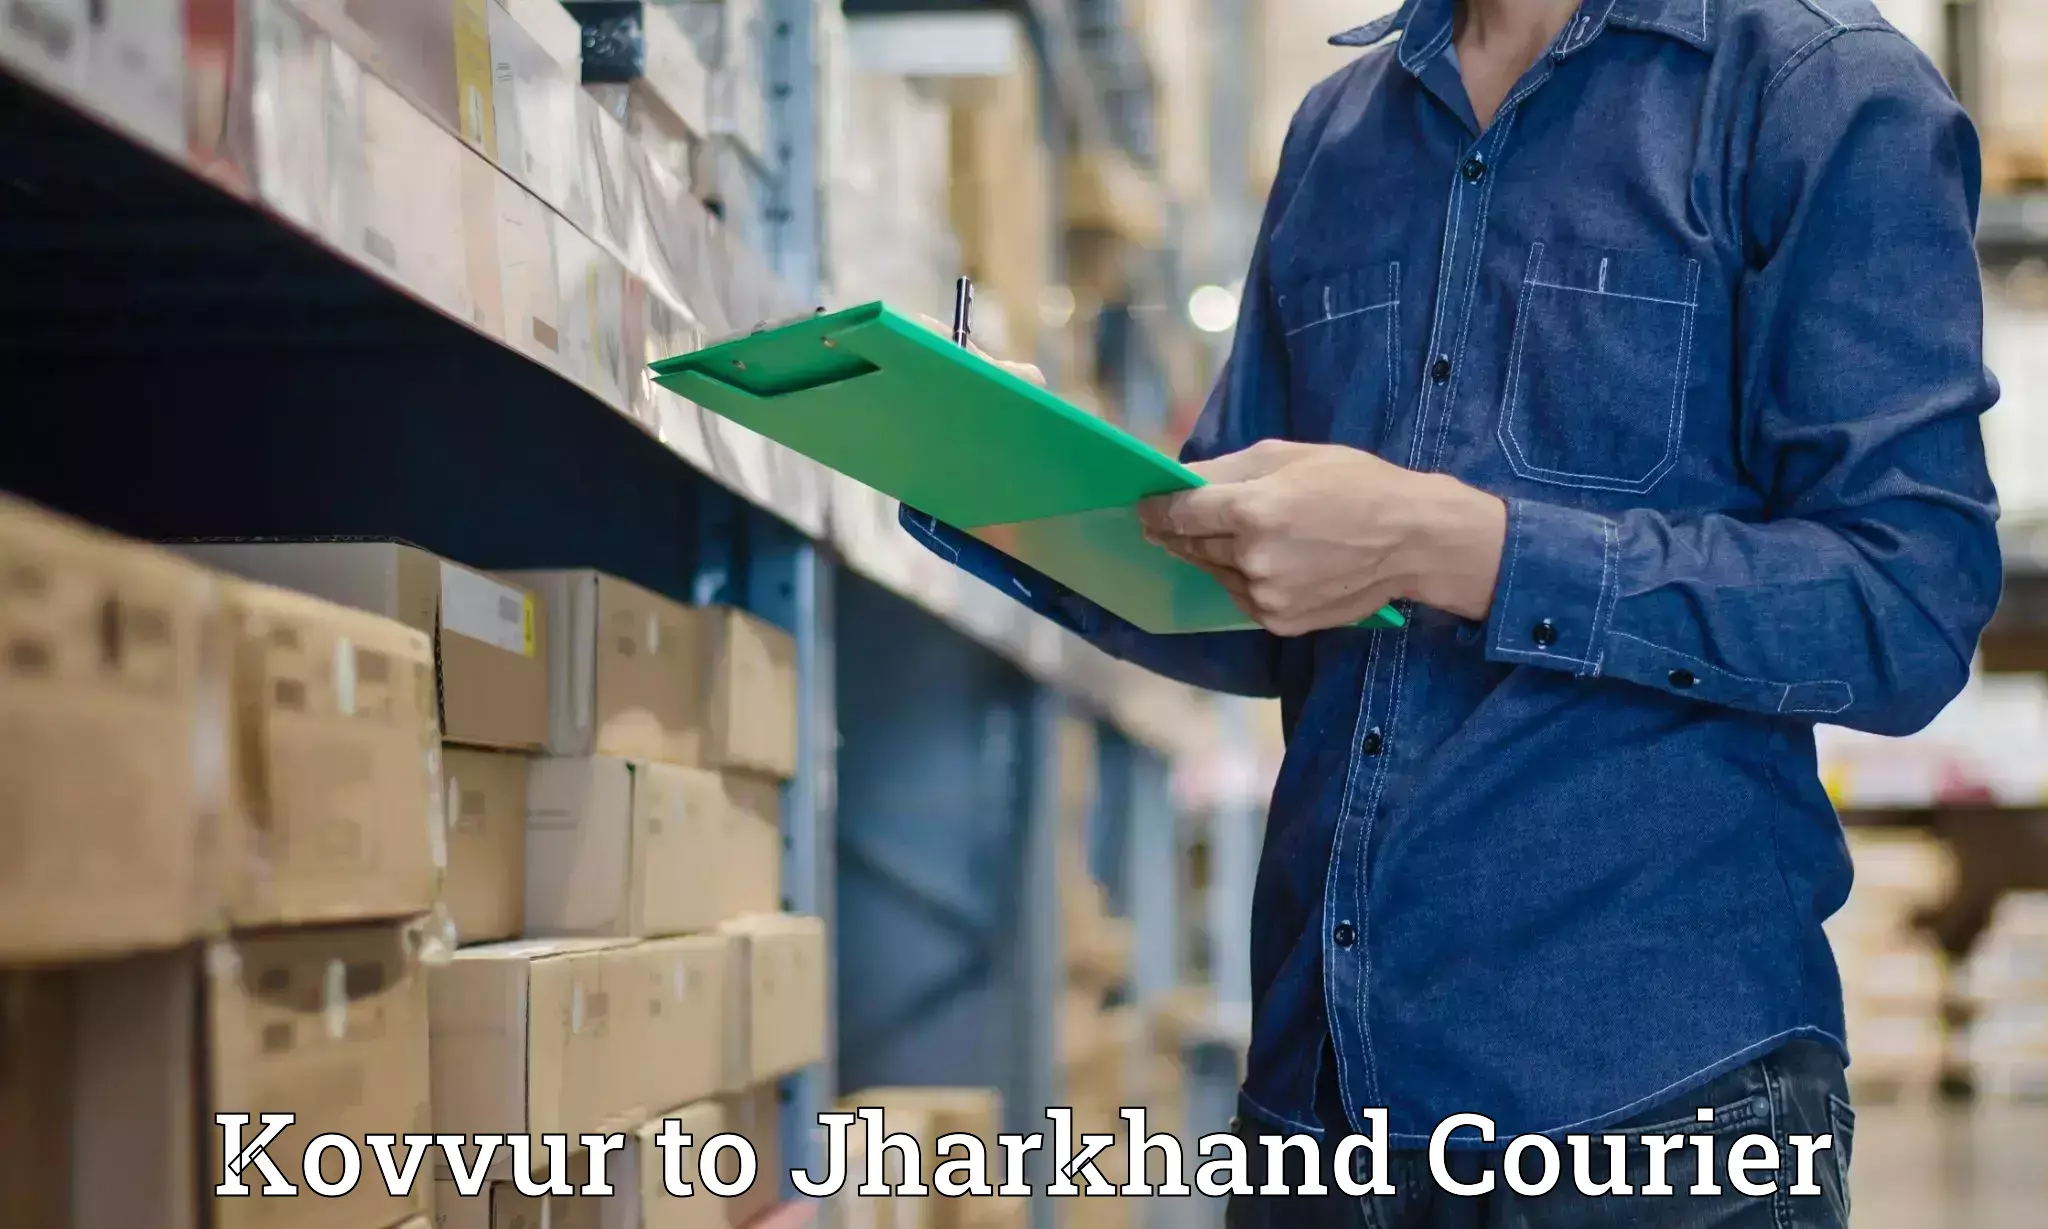 Long distance courier Kovvur to Jharkhand